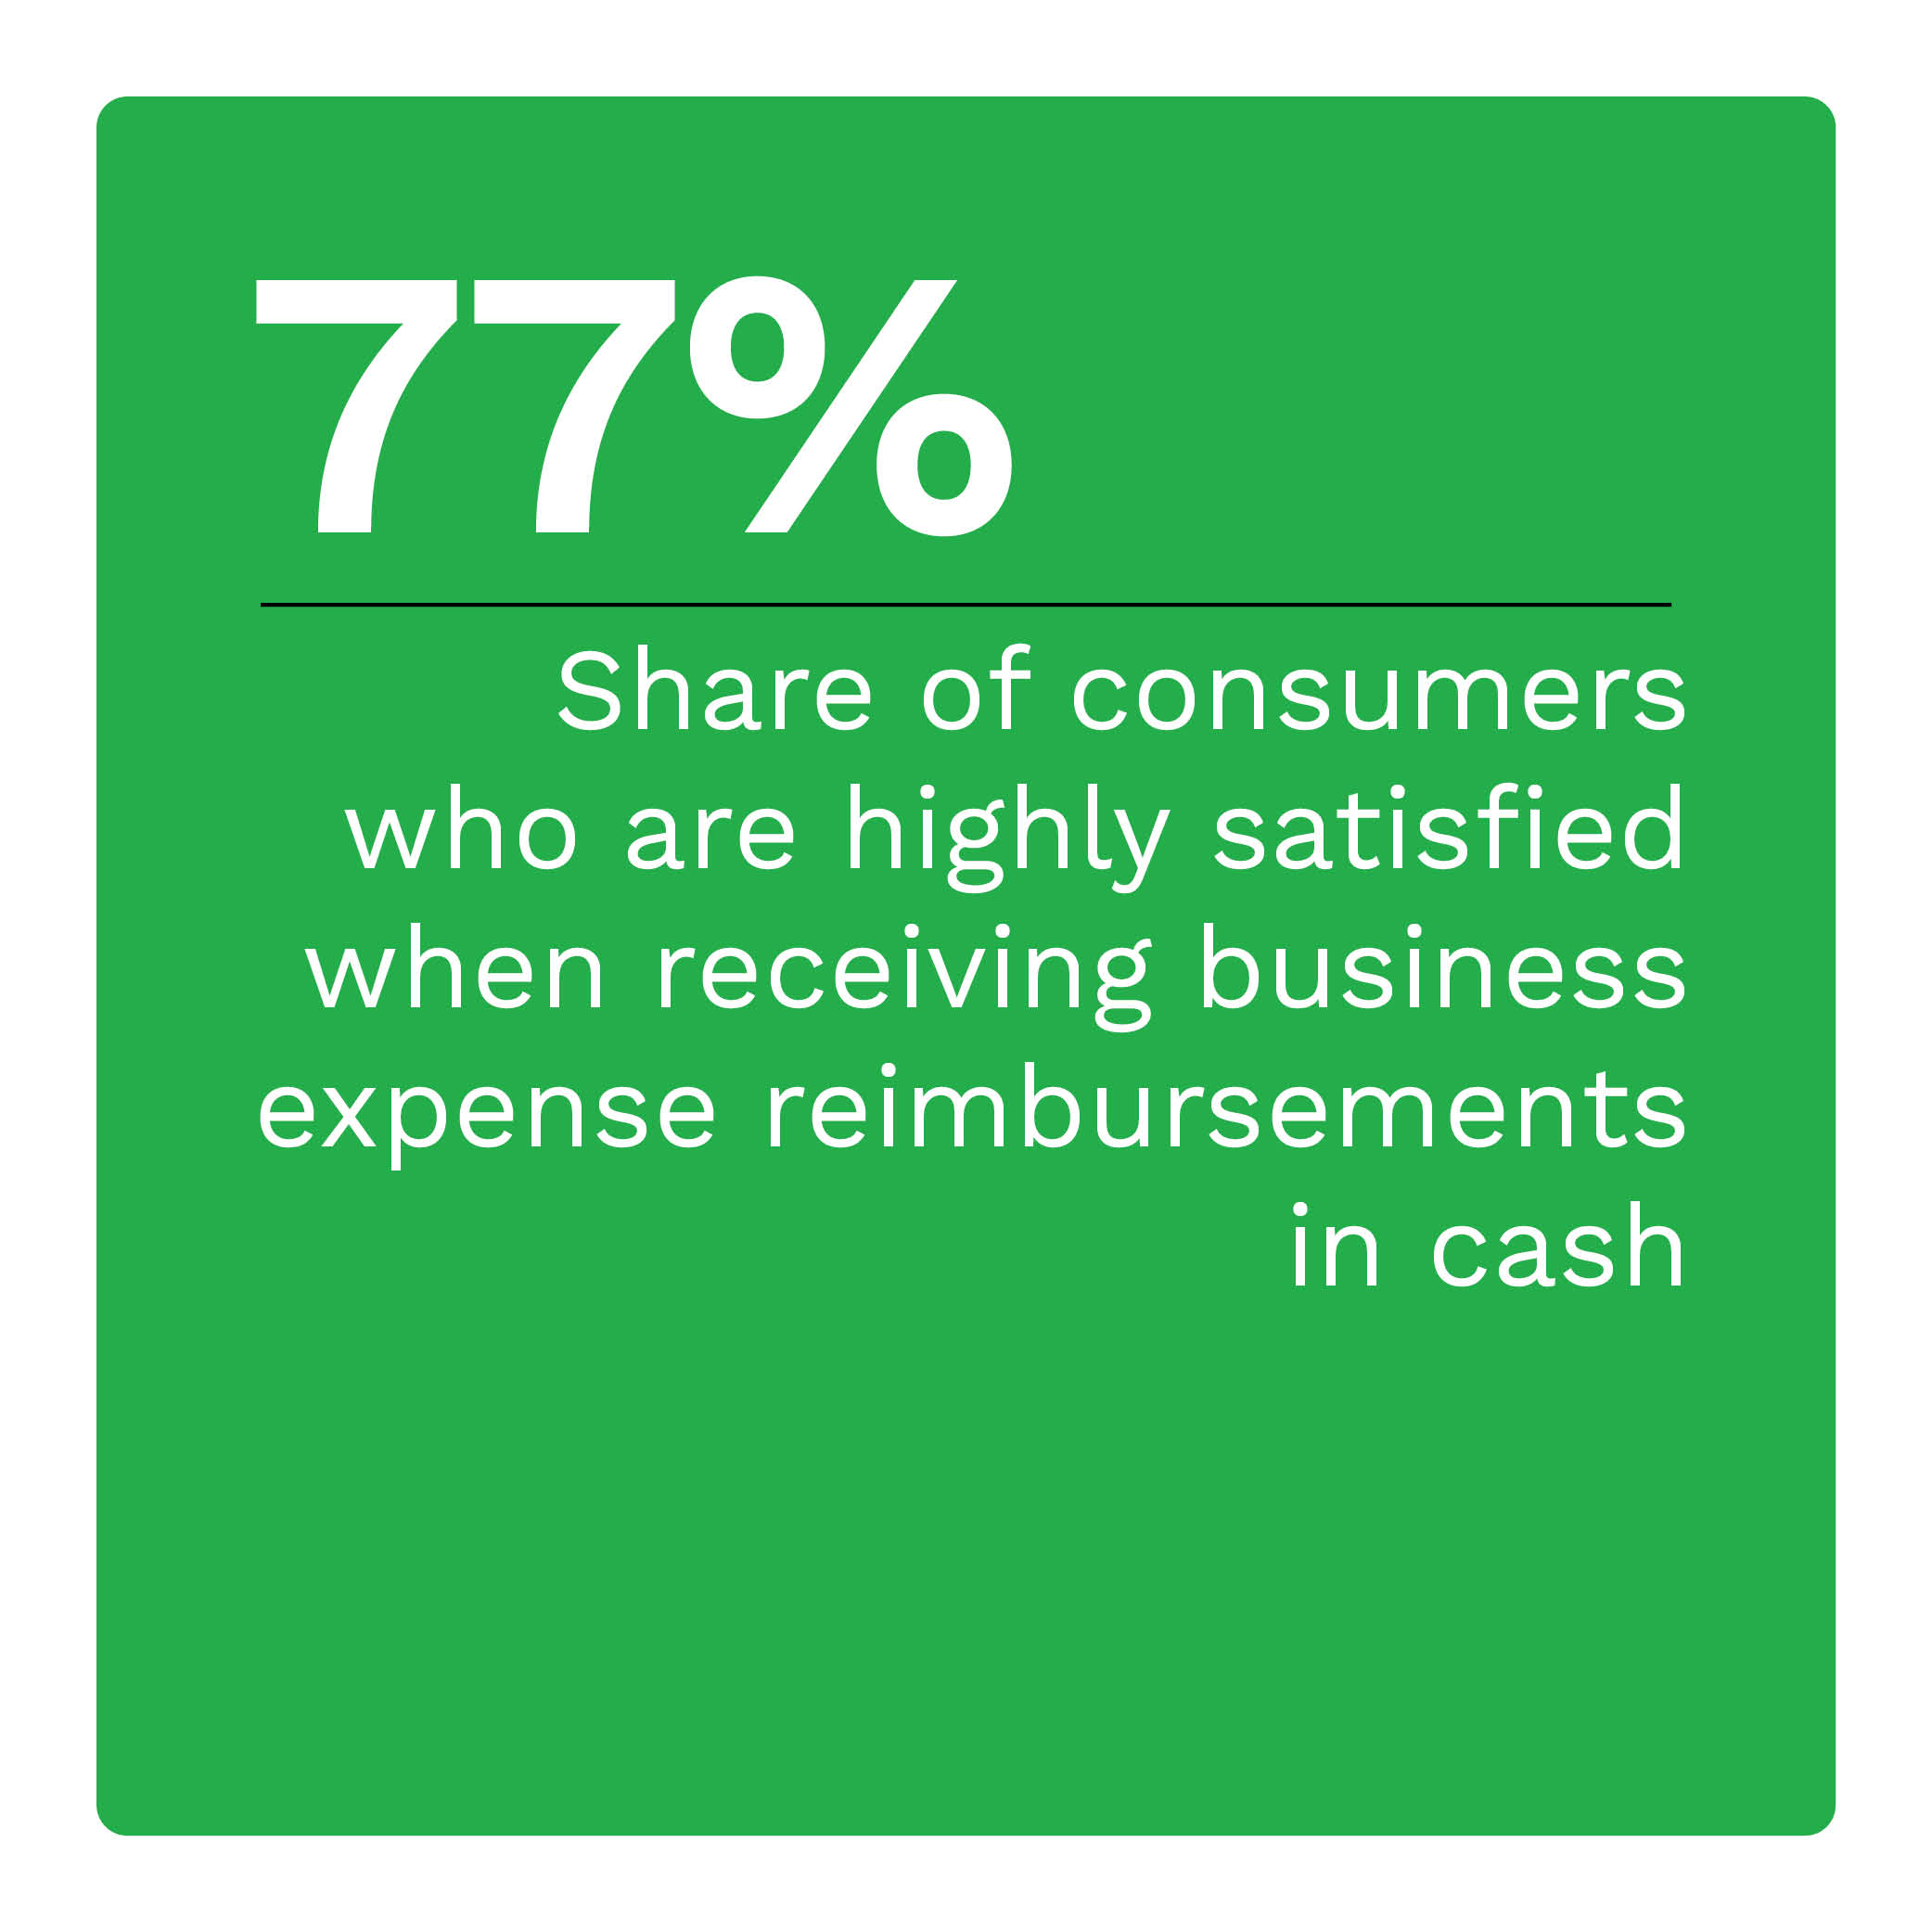 77%: Share of consumers who are highly satisfied when receiving business expense reimbursements in cash